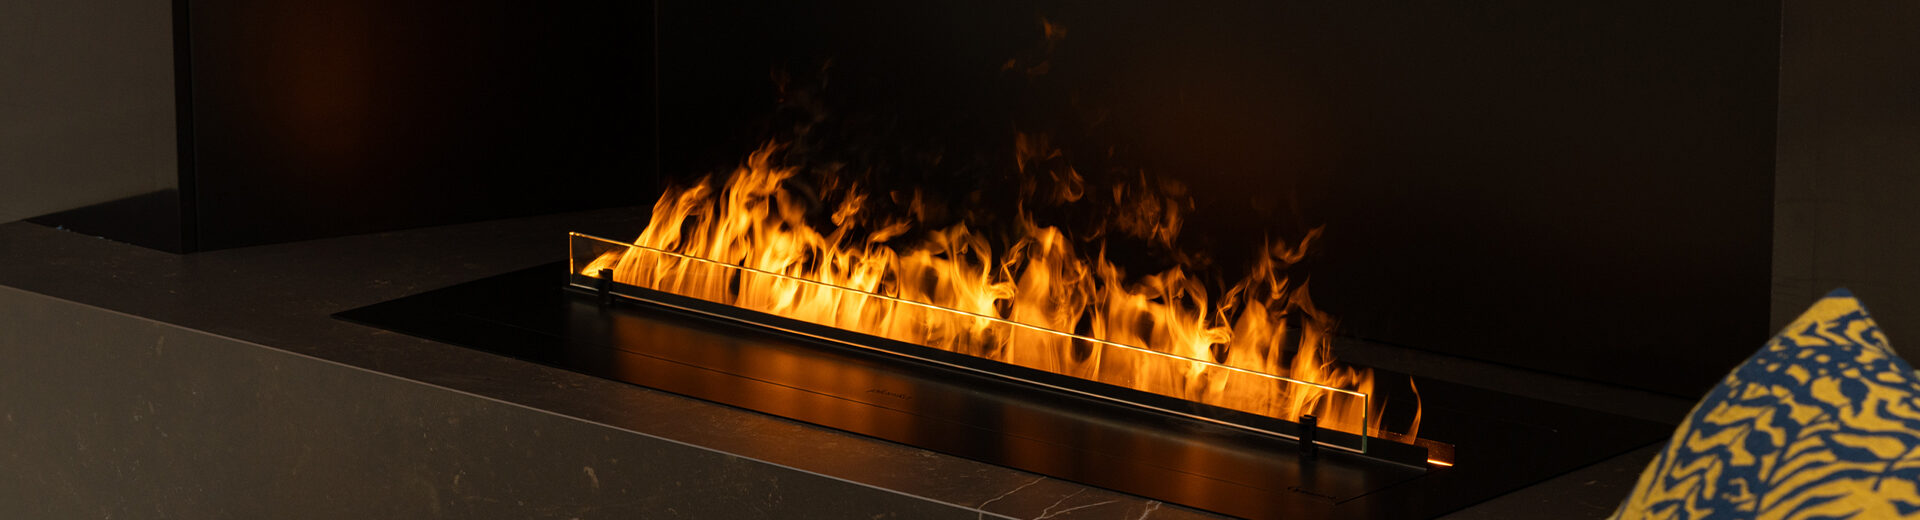 water-fireplaces-category-banner-01-1920x520-c-default